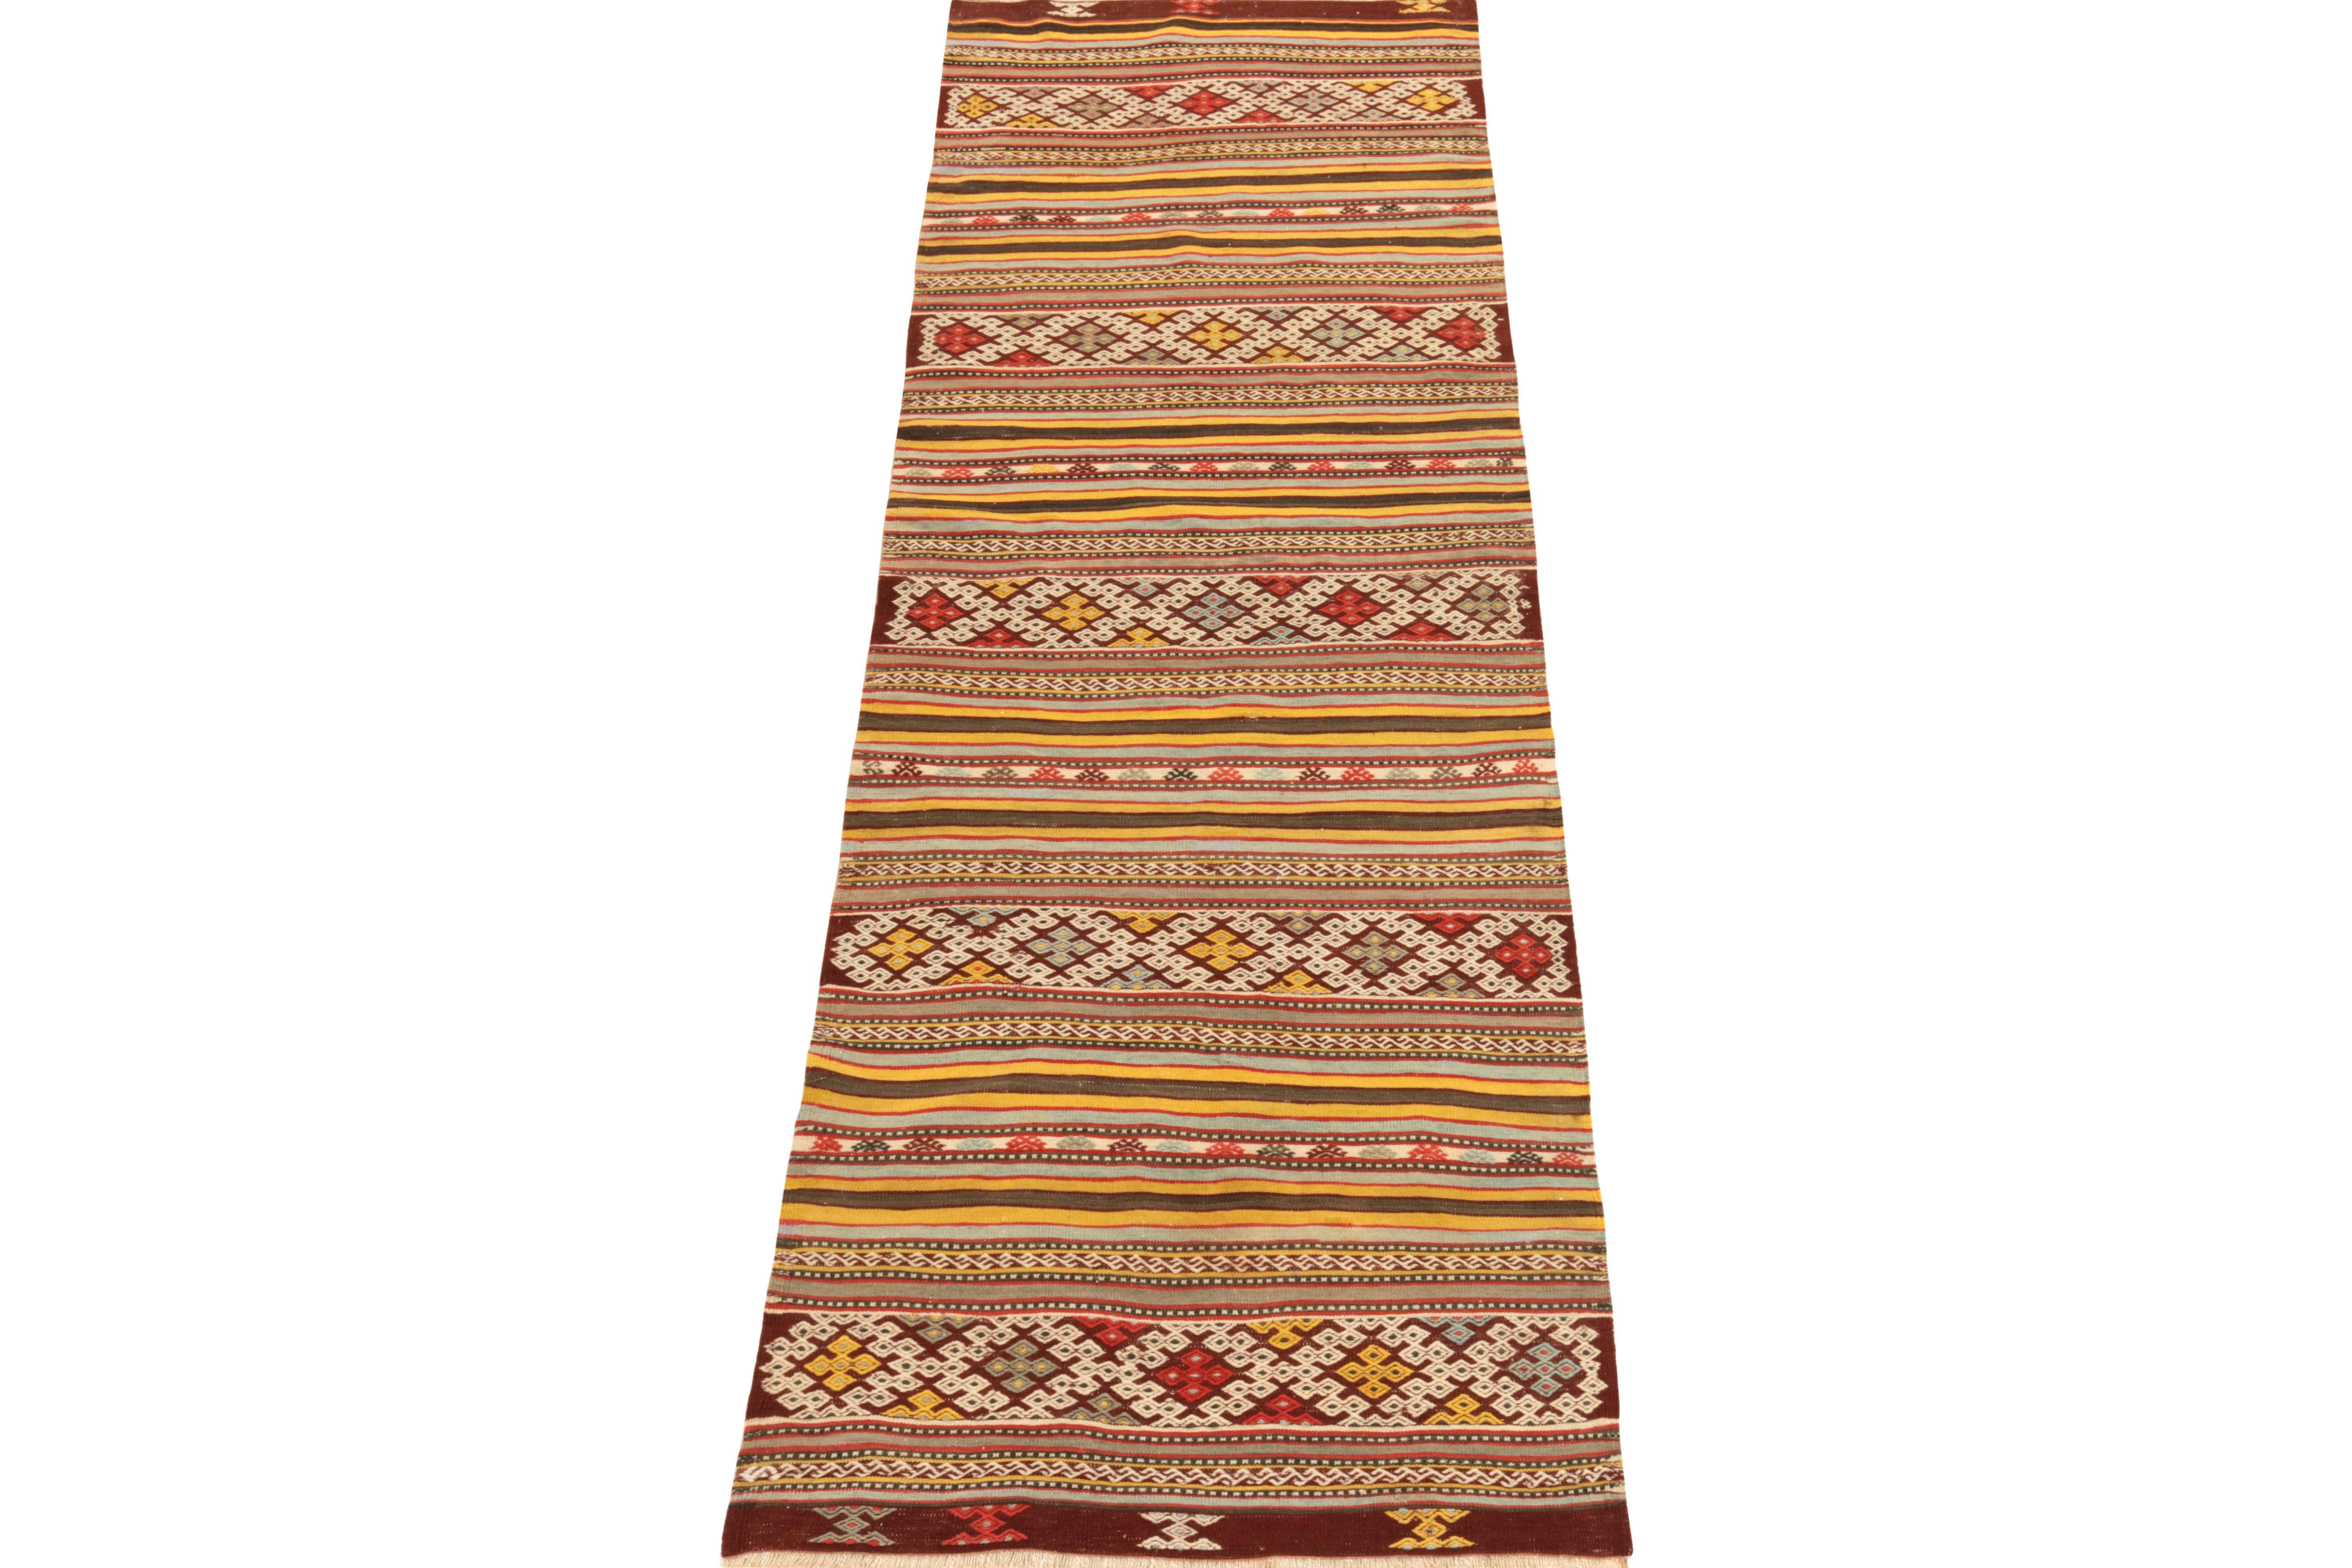 Handwoven in fine wool, a 3x9 Helvaci piece from our Kilim & Flatweave collection. Originating from Turkey circa 1950-1960, this vintage kilim runner reads striped variations & fine tribal motifs in lively yellow, red, white & grey-blue tones